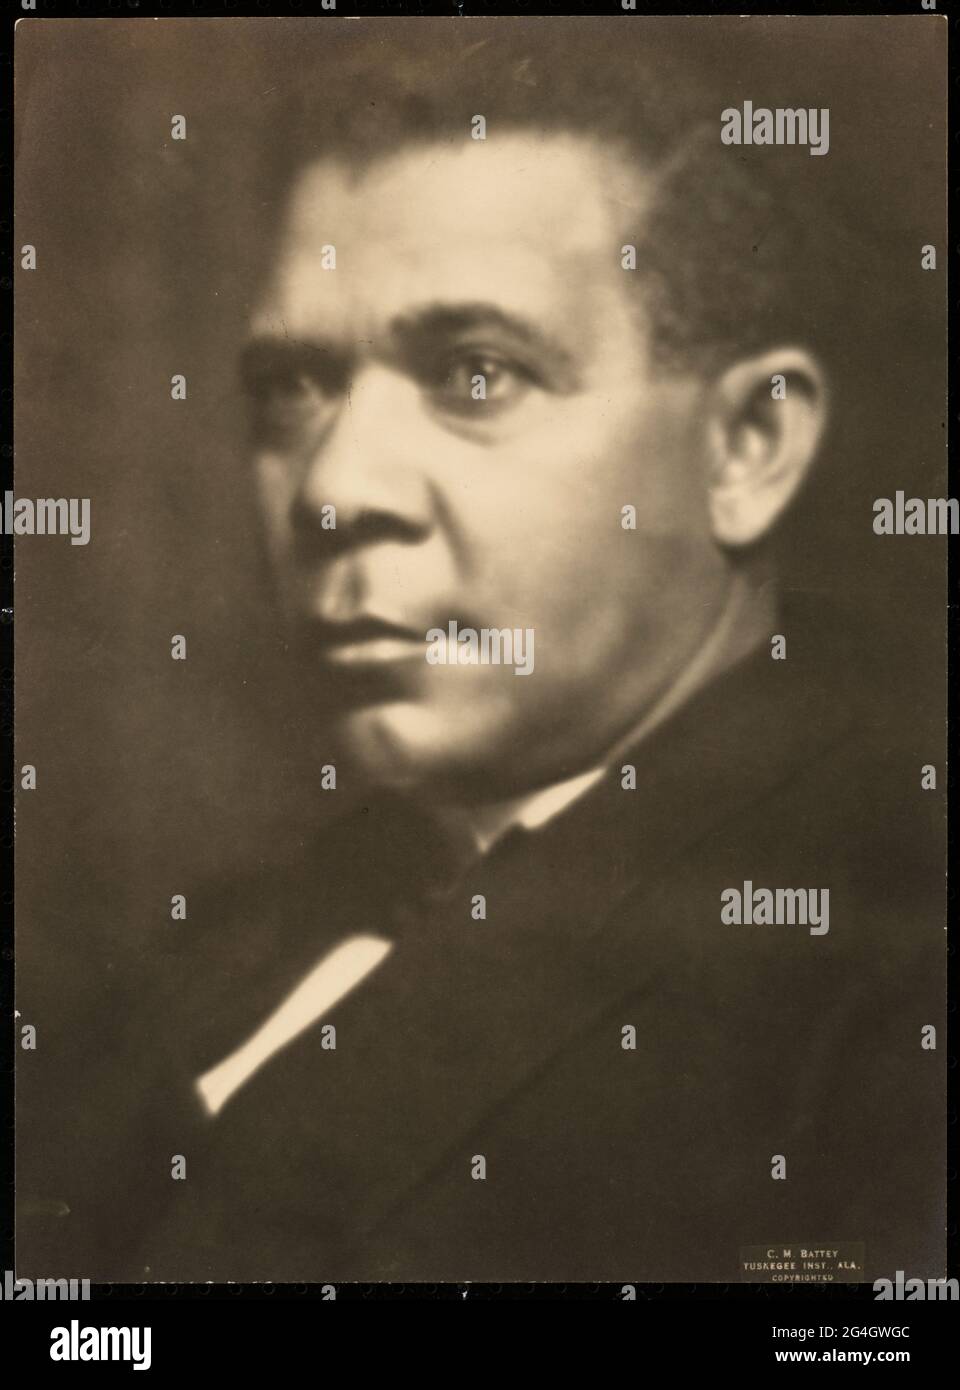 A black-and-white print of a bust-length portrait of Booker T. Washington, seated left. Born into slavery in Virginia, Booker Taliaferro Washington (1856-1915) was an African-American educator, author, orator, and adviser to several presidents of the United States. Stock Photo